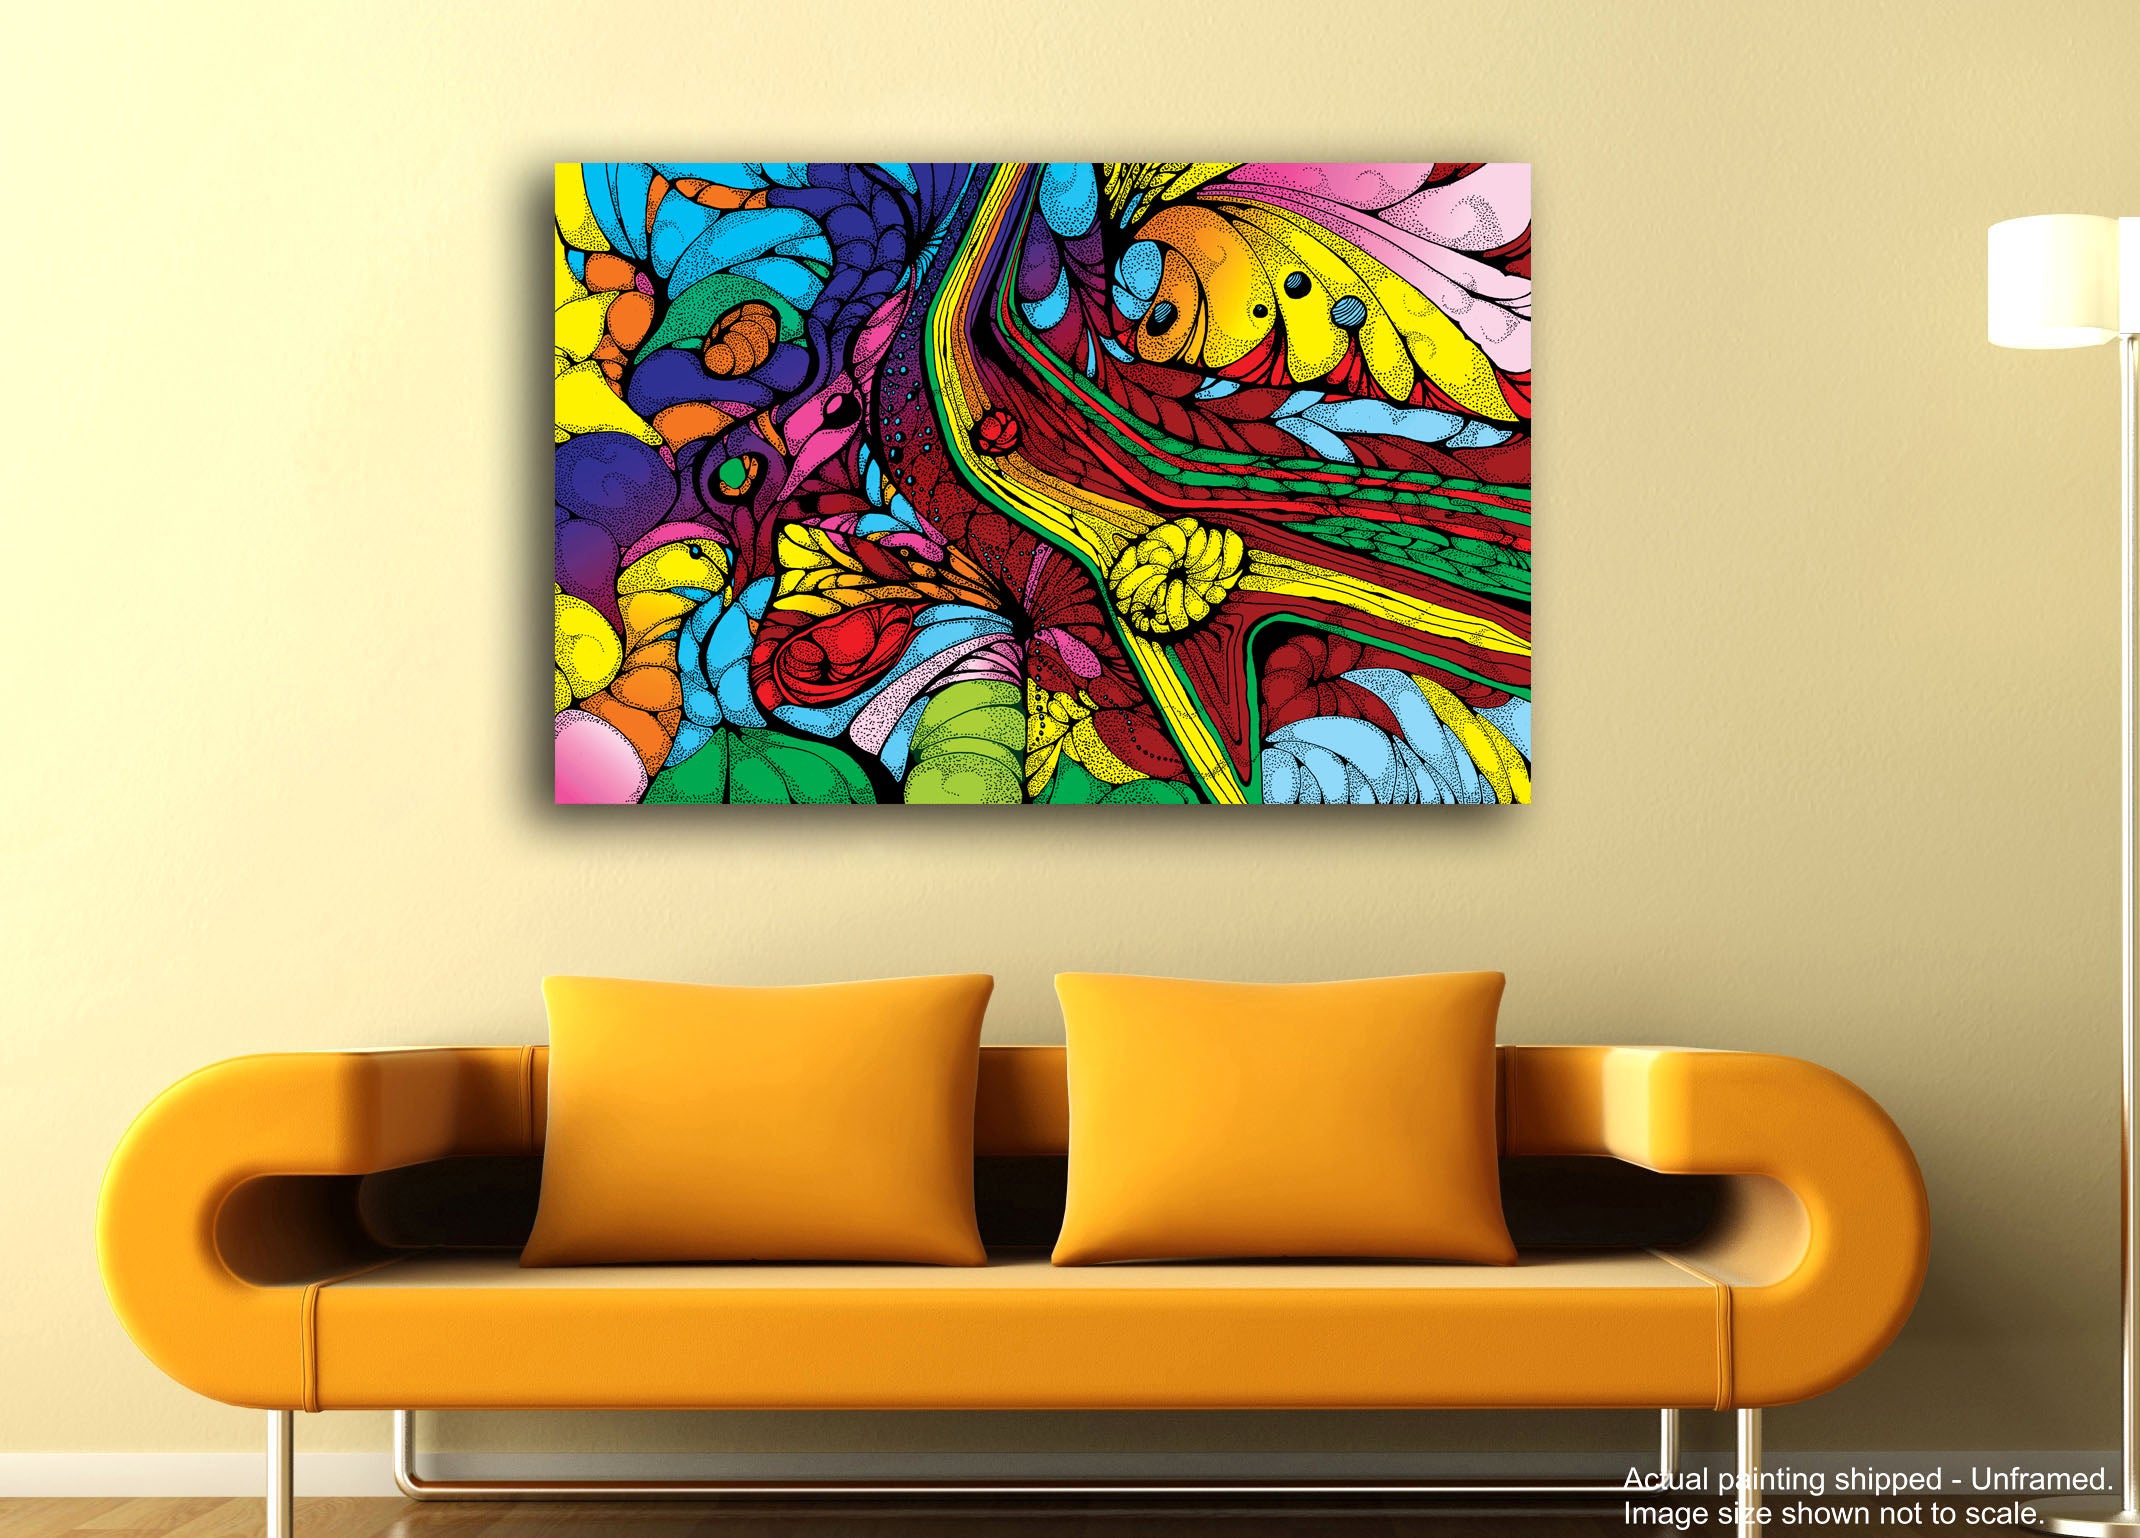 Colorful Abstract Art